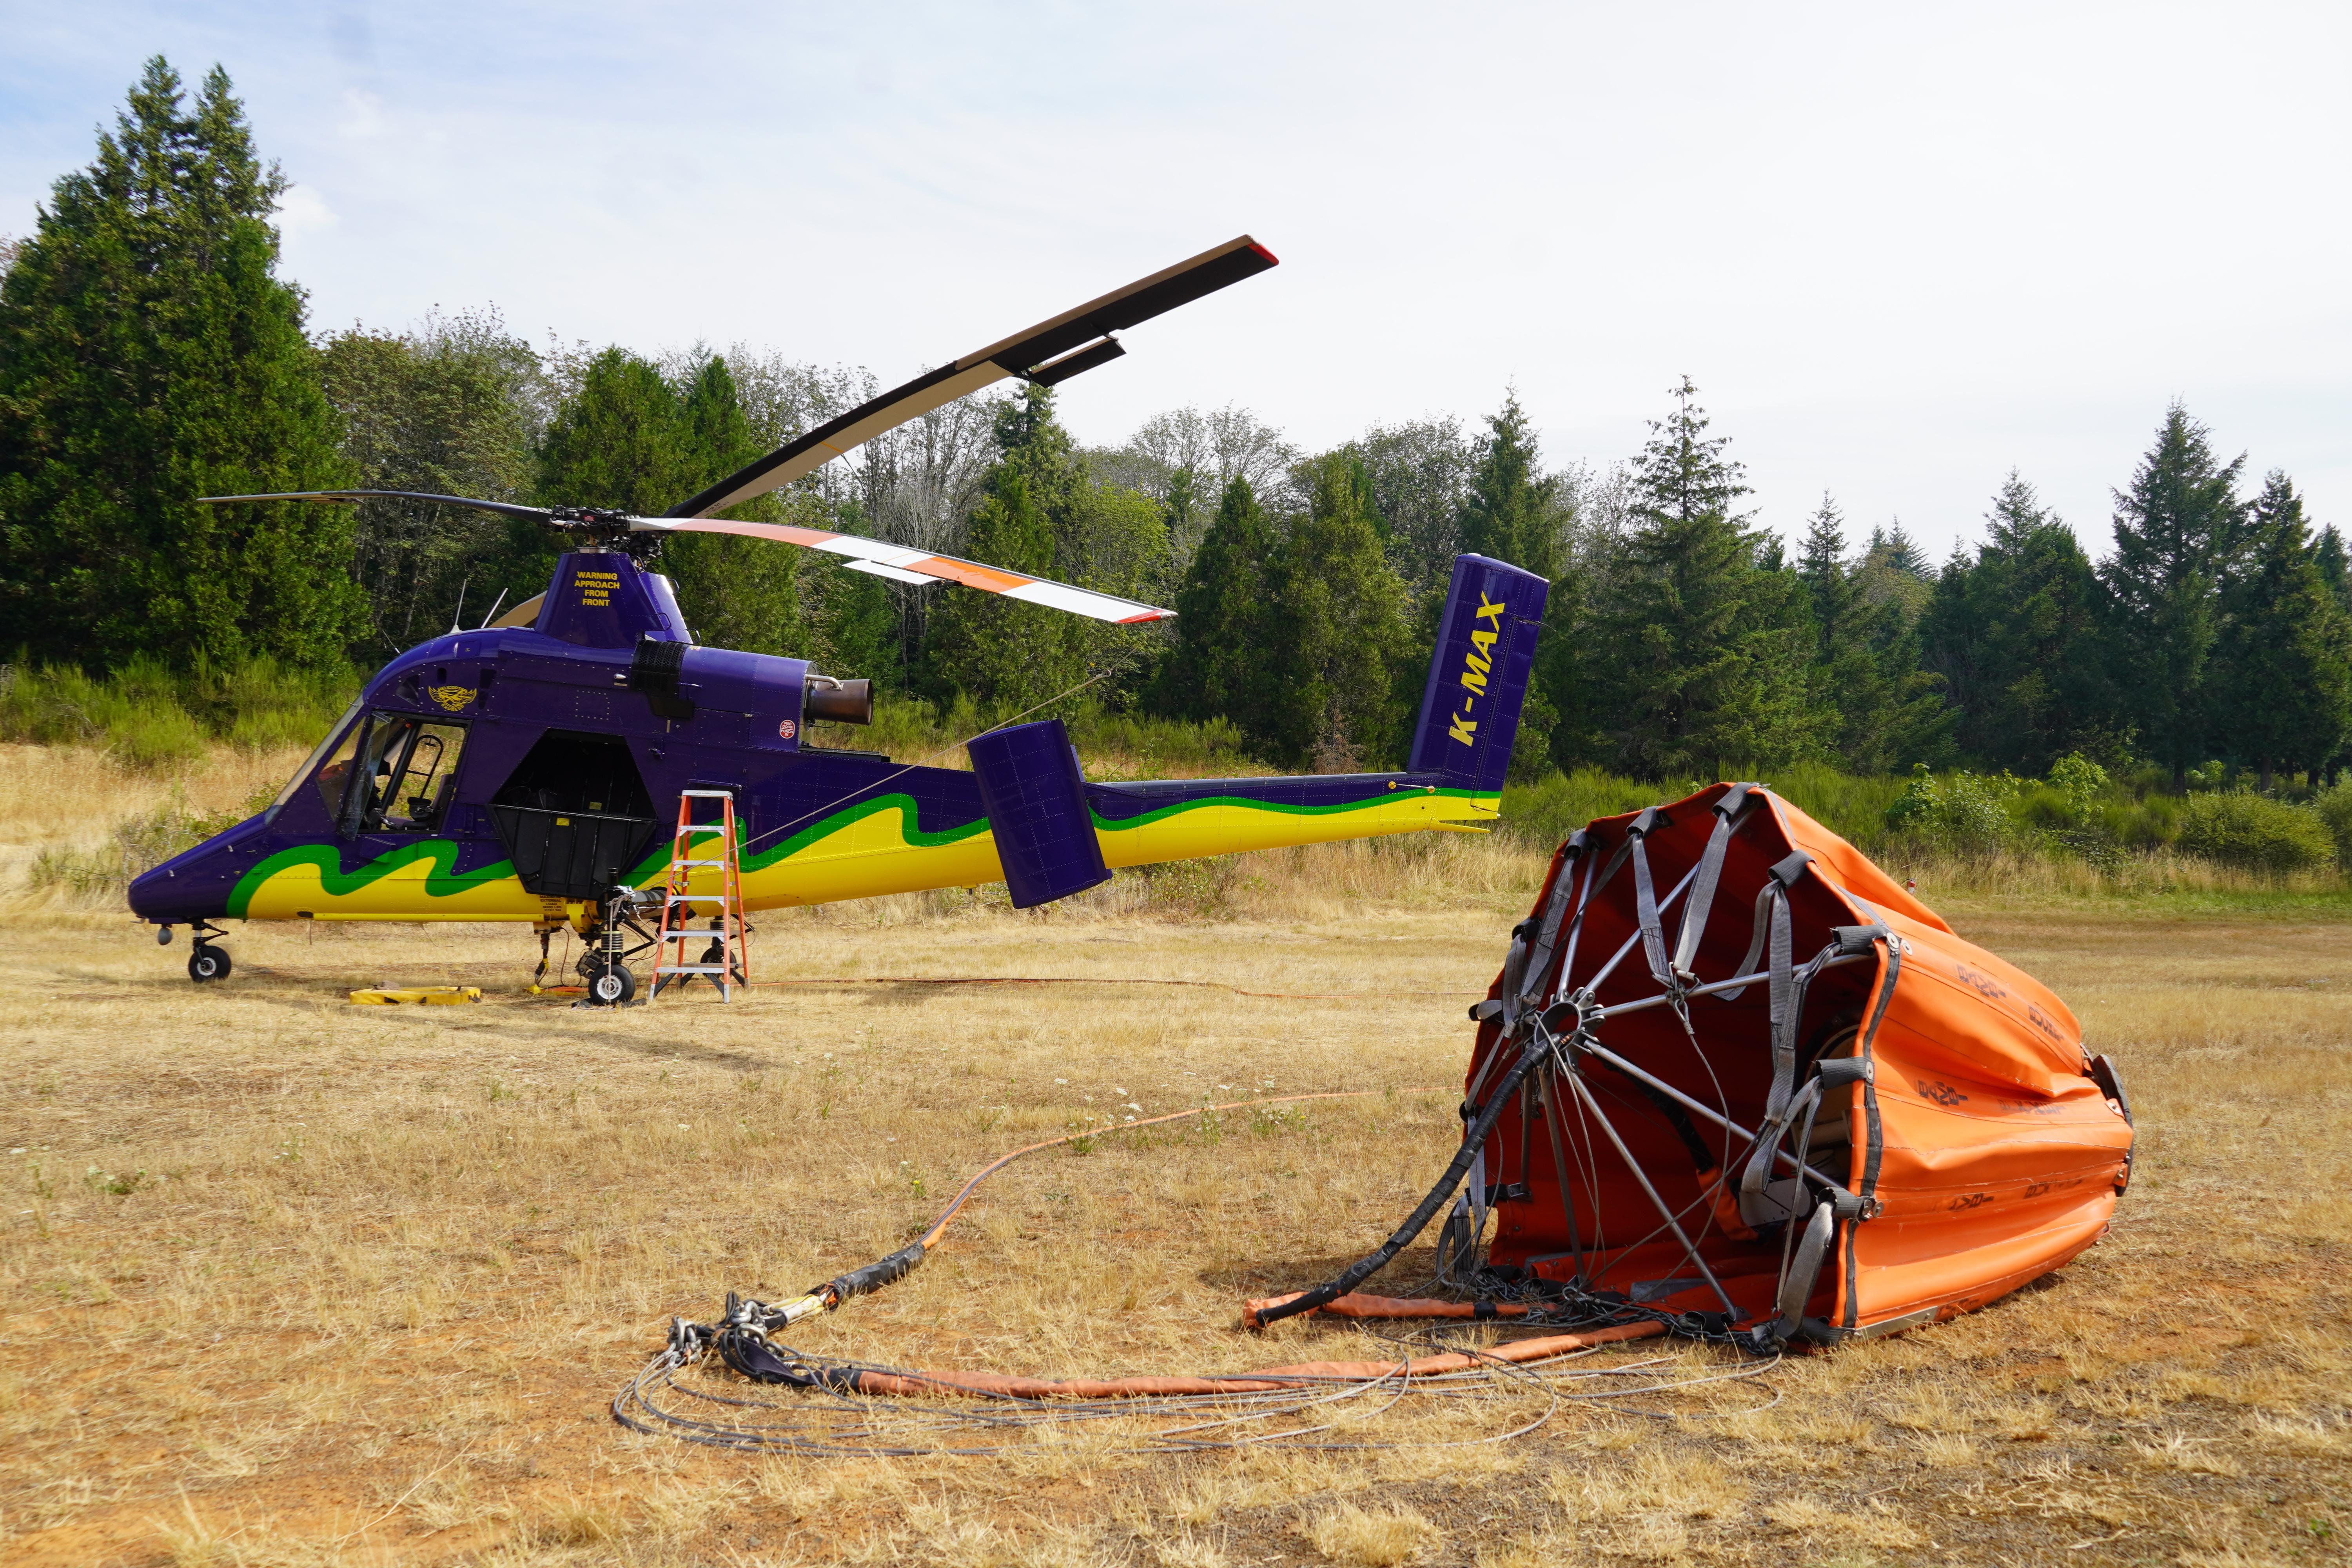 A large helicopter, painted purple and yellow with a green border between those two colors is seen sitting stationary on the ground. Its water bucket, connected by a large cable, is shown in the foreground.